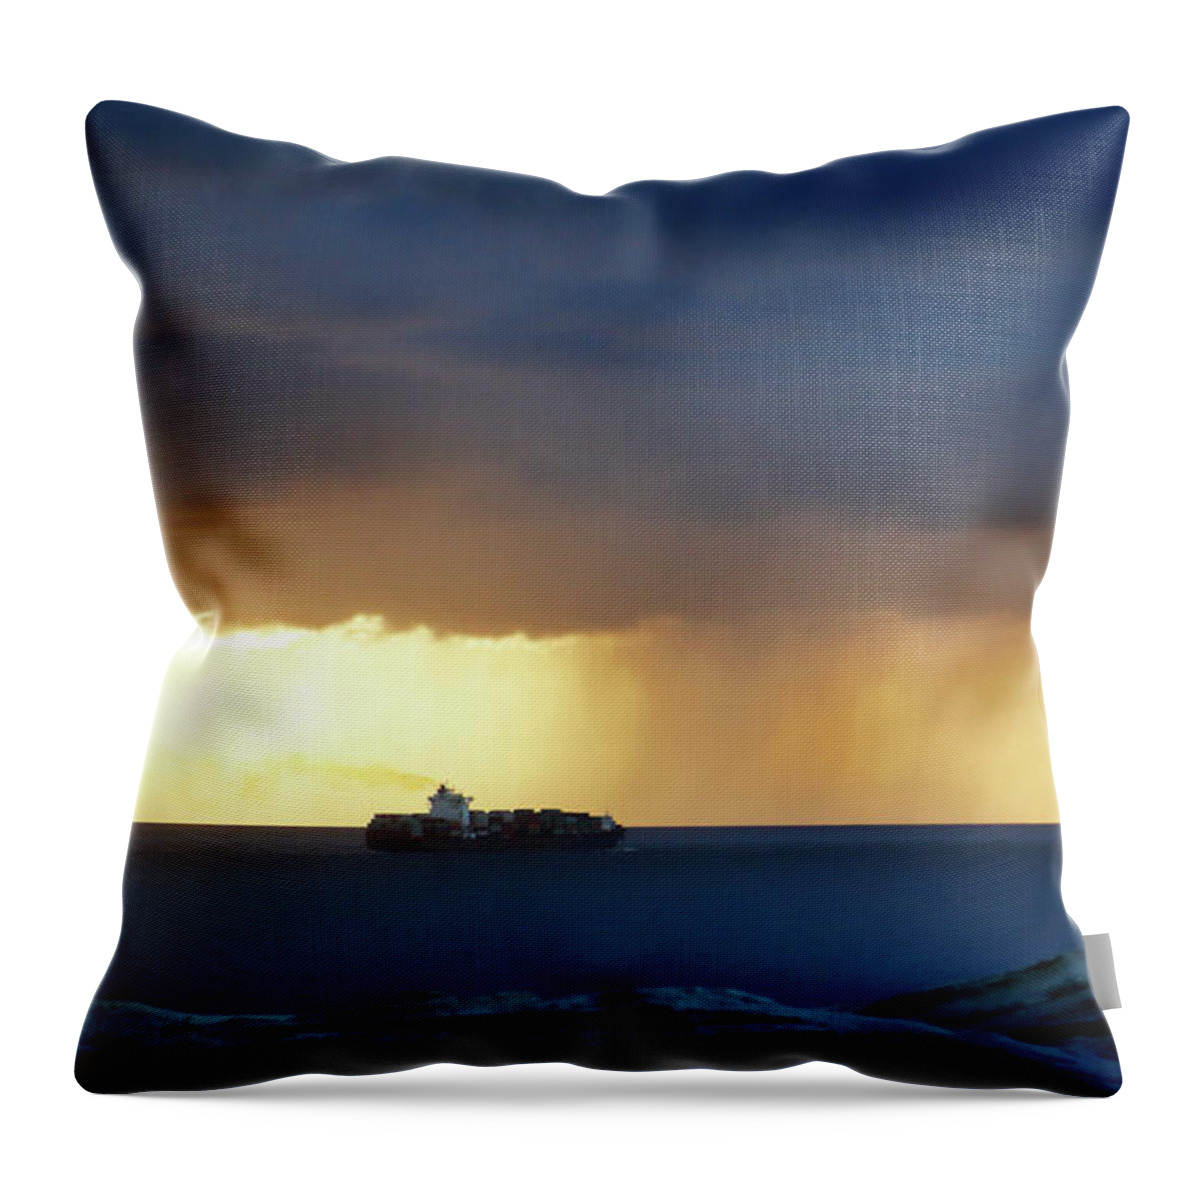 Passing Throw Pillow featuring the photograph Passing By by Nicholas Blackwell